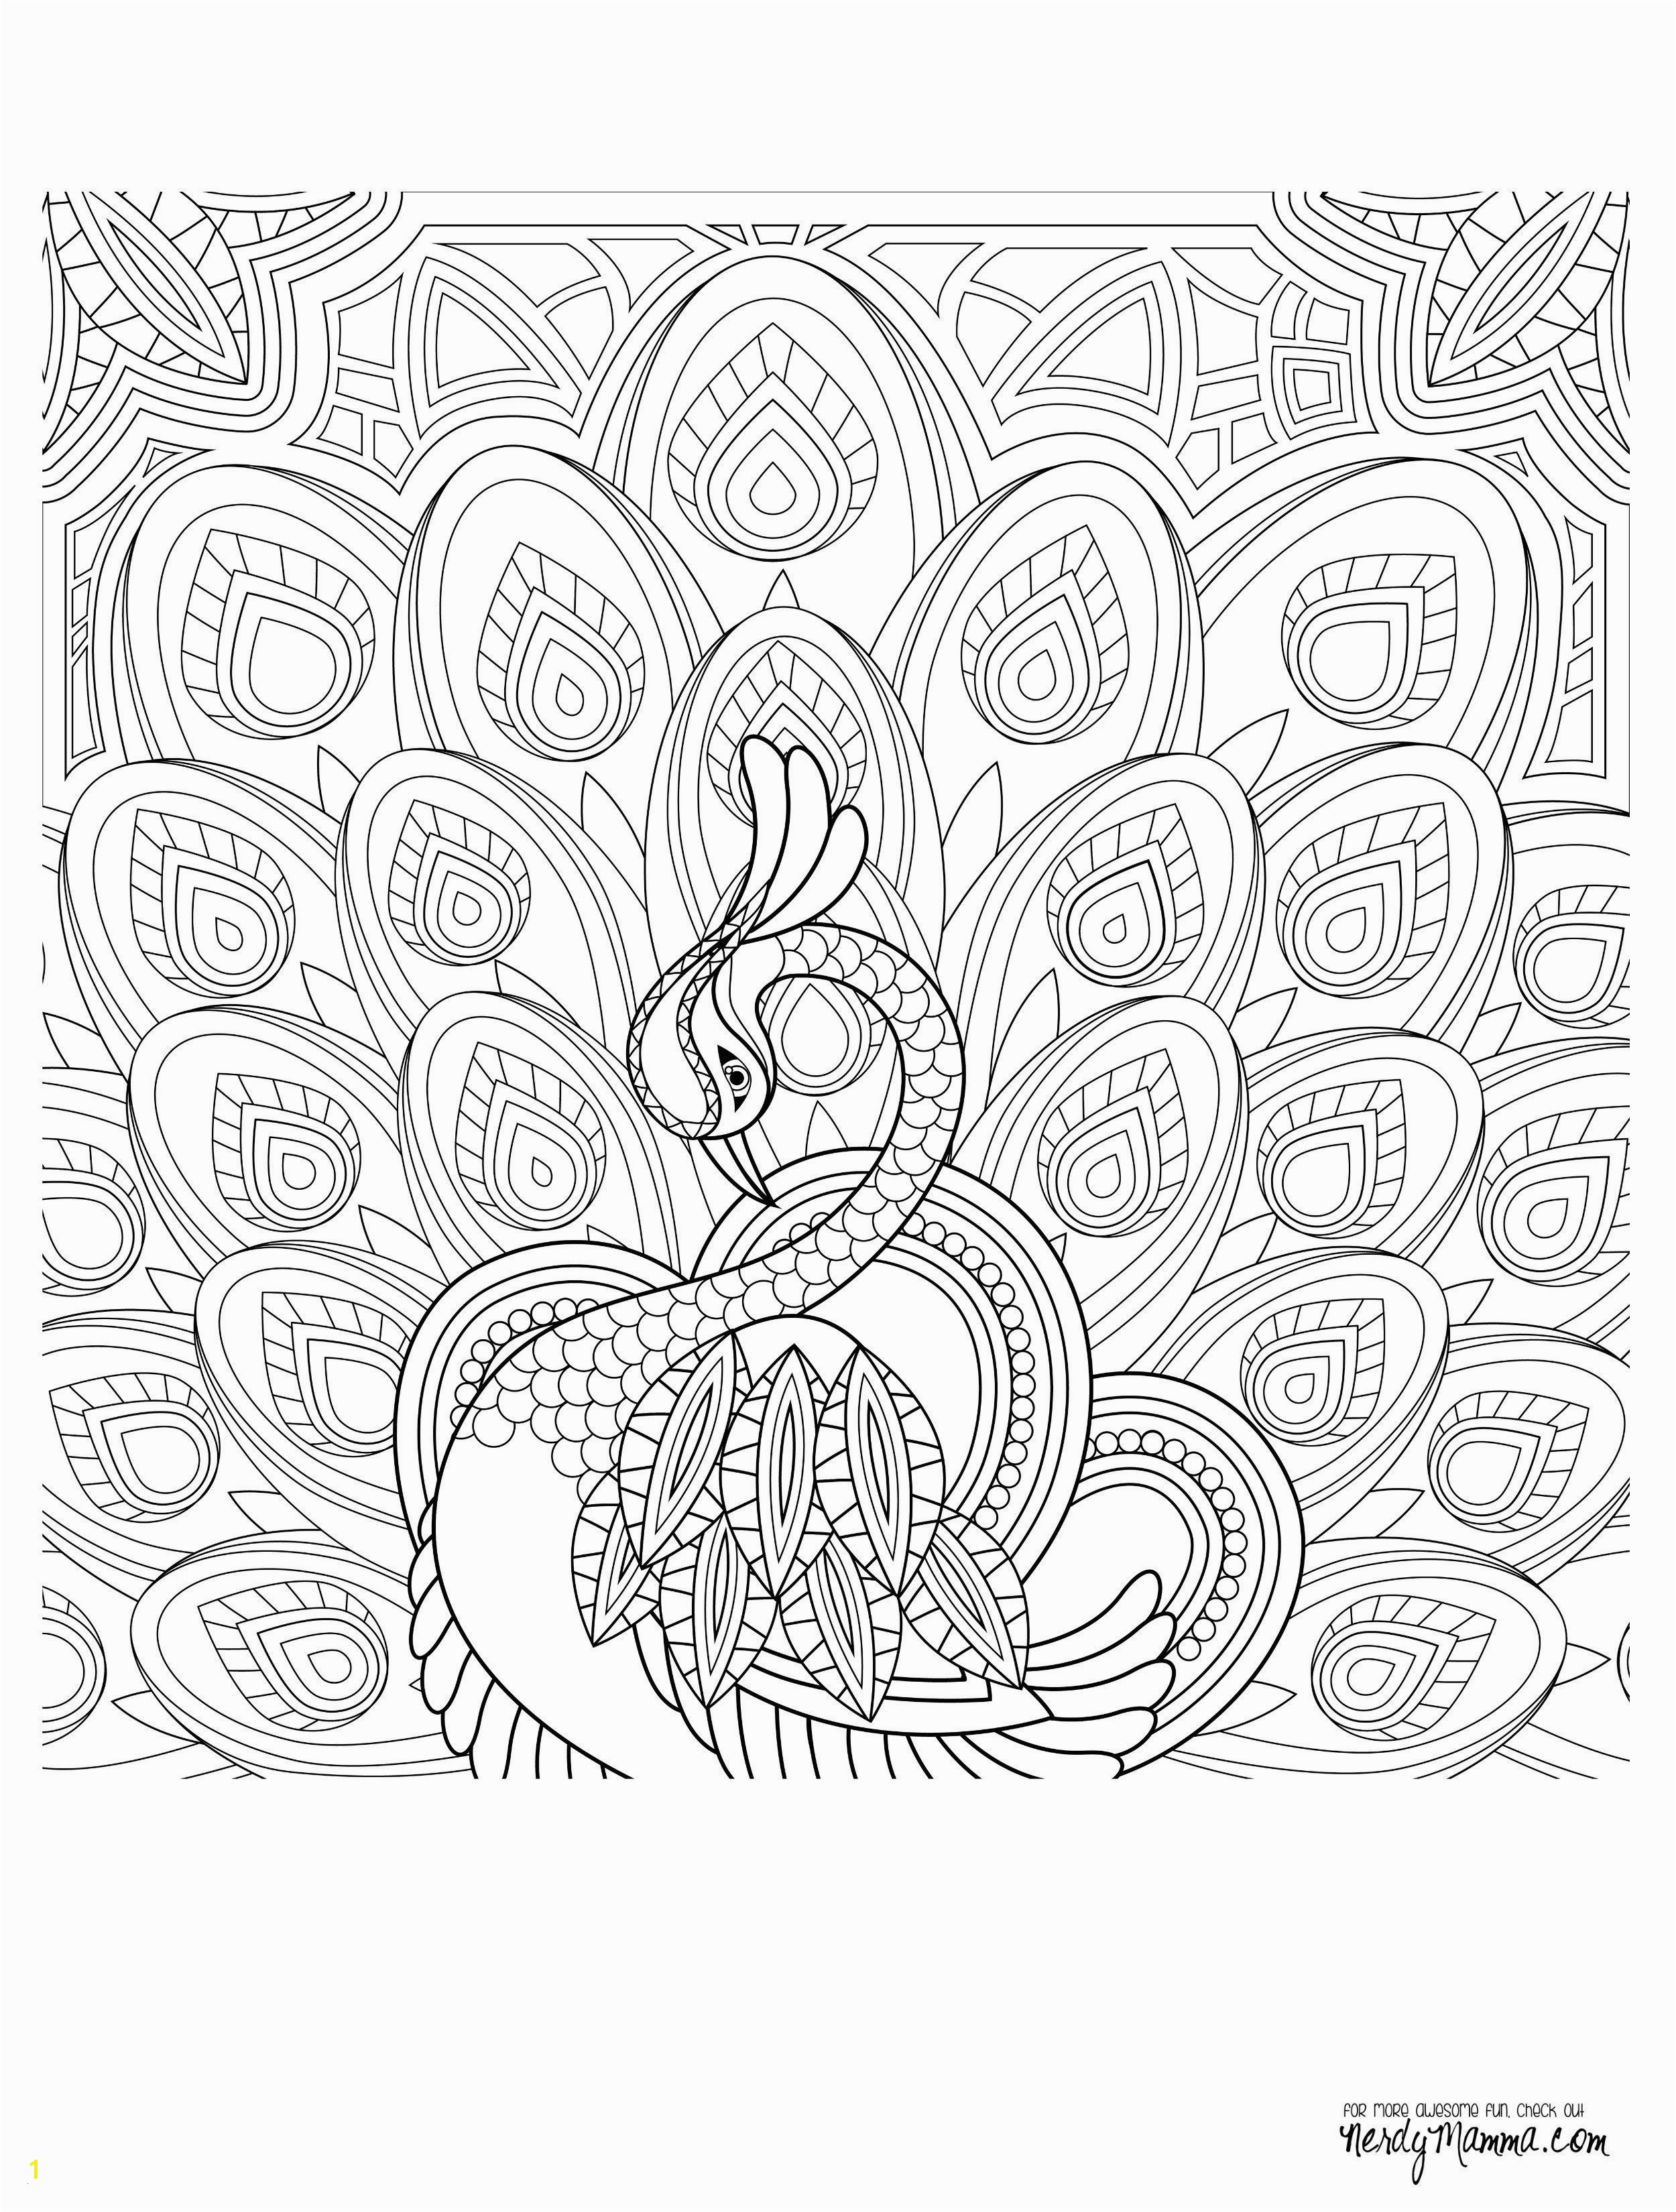 Sunny the Sunflower Coloring Page Coloring Pages for Kids New Coloring Printables 0d – Fun Time